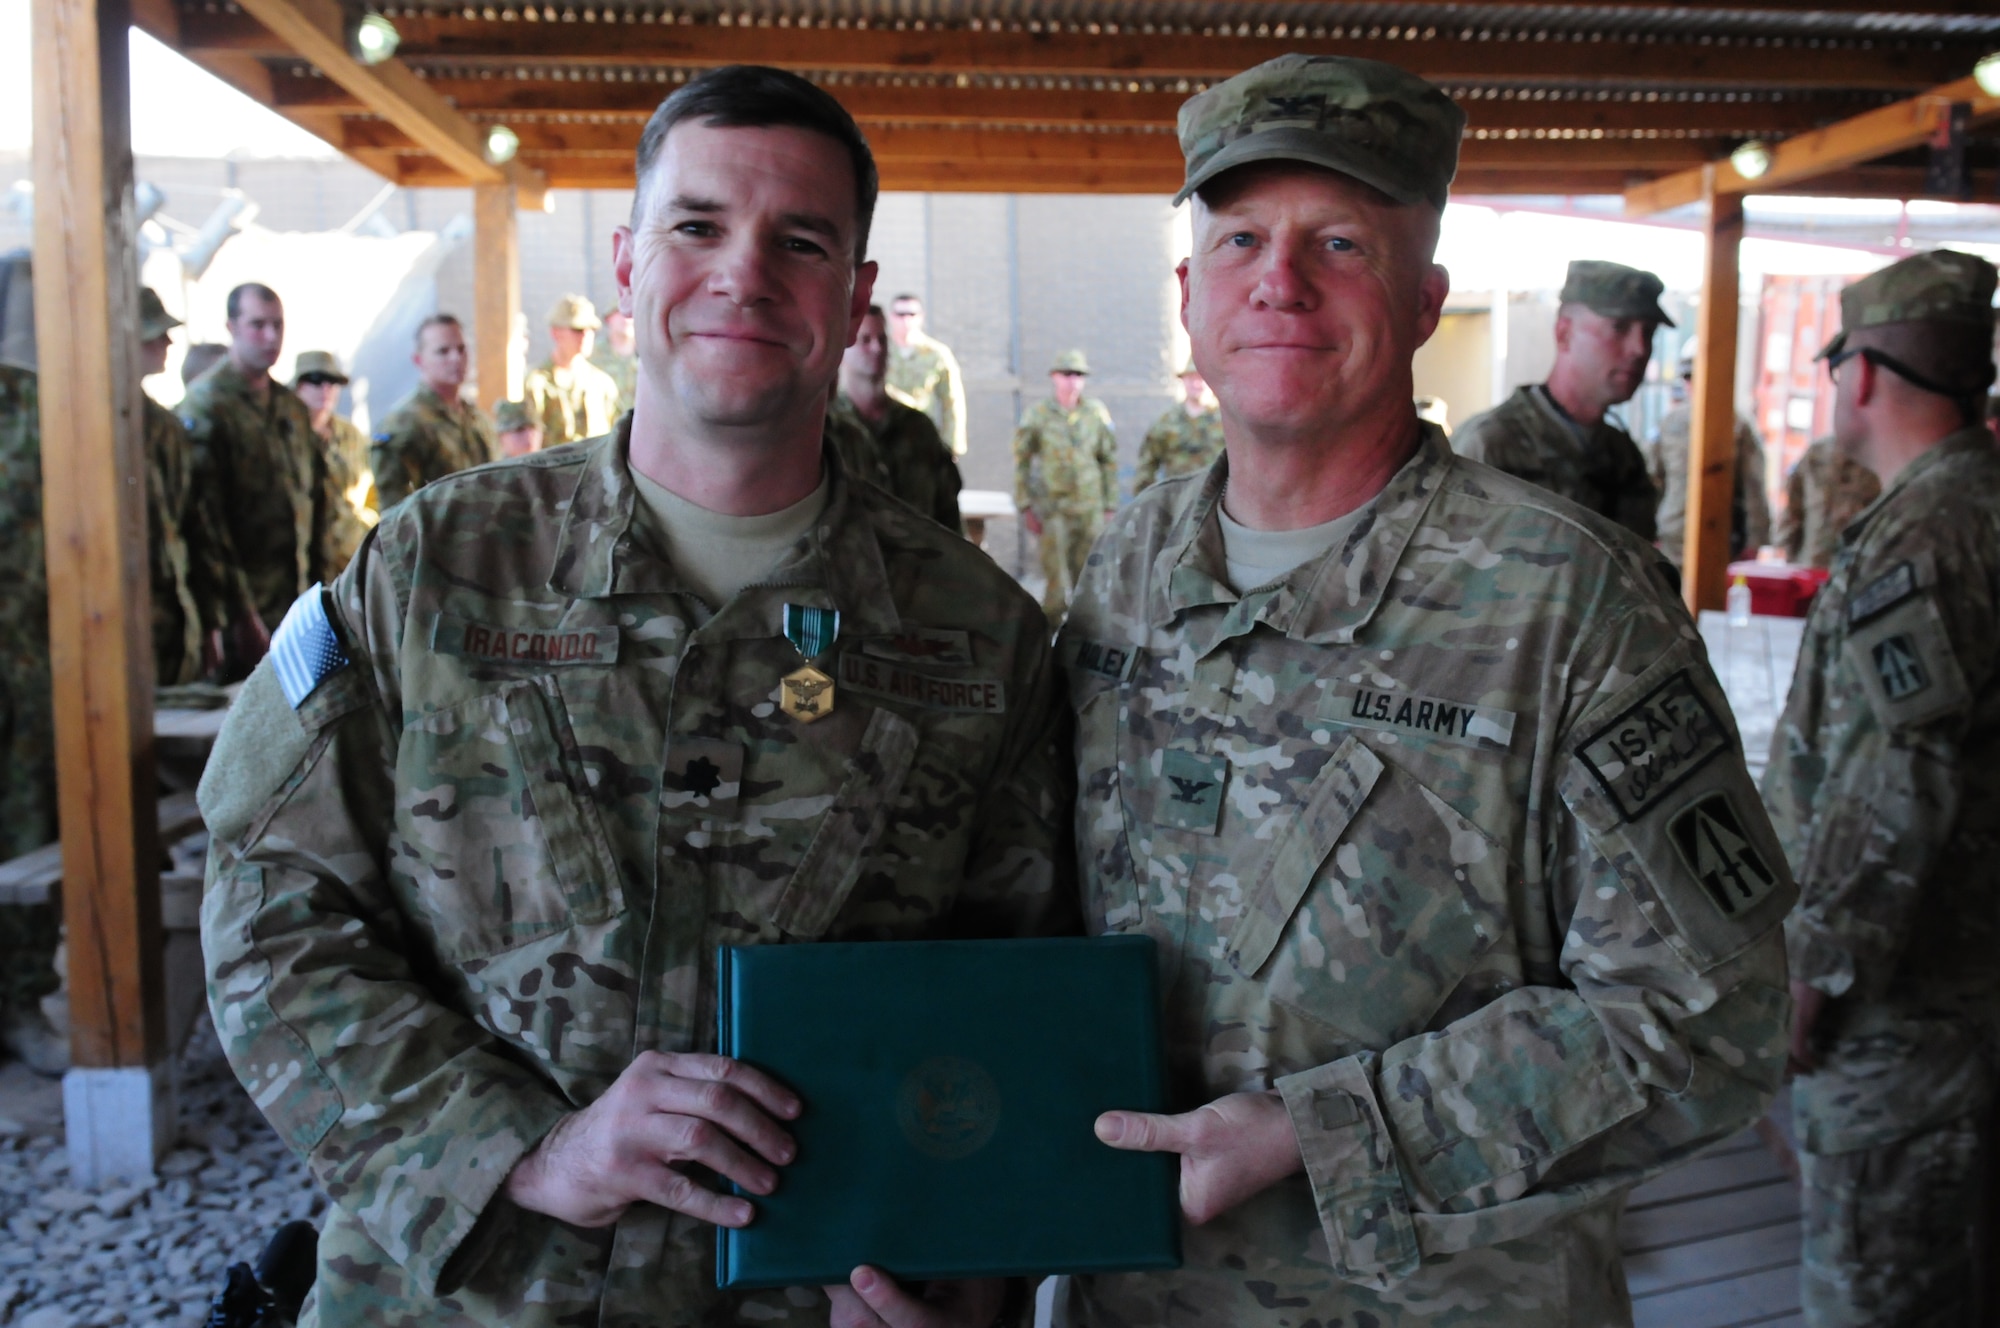 Col. Hadley, commander of the 76th IBCT, presents Lt. Col. Iracondo, 113th ASOS, the Army Commendation Medal.